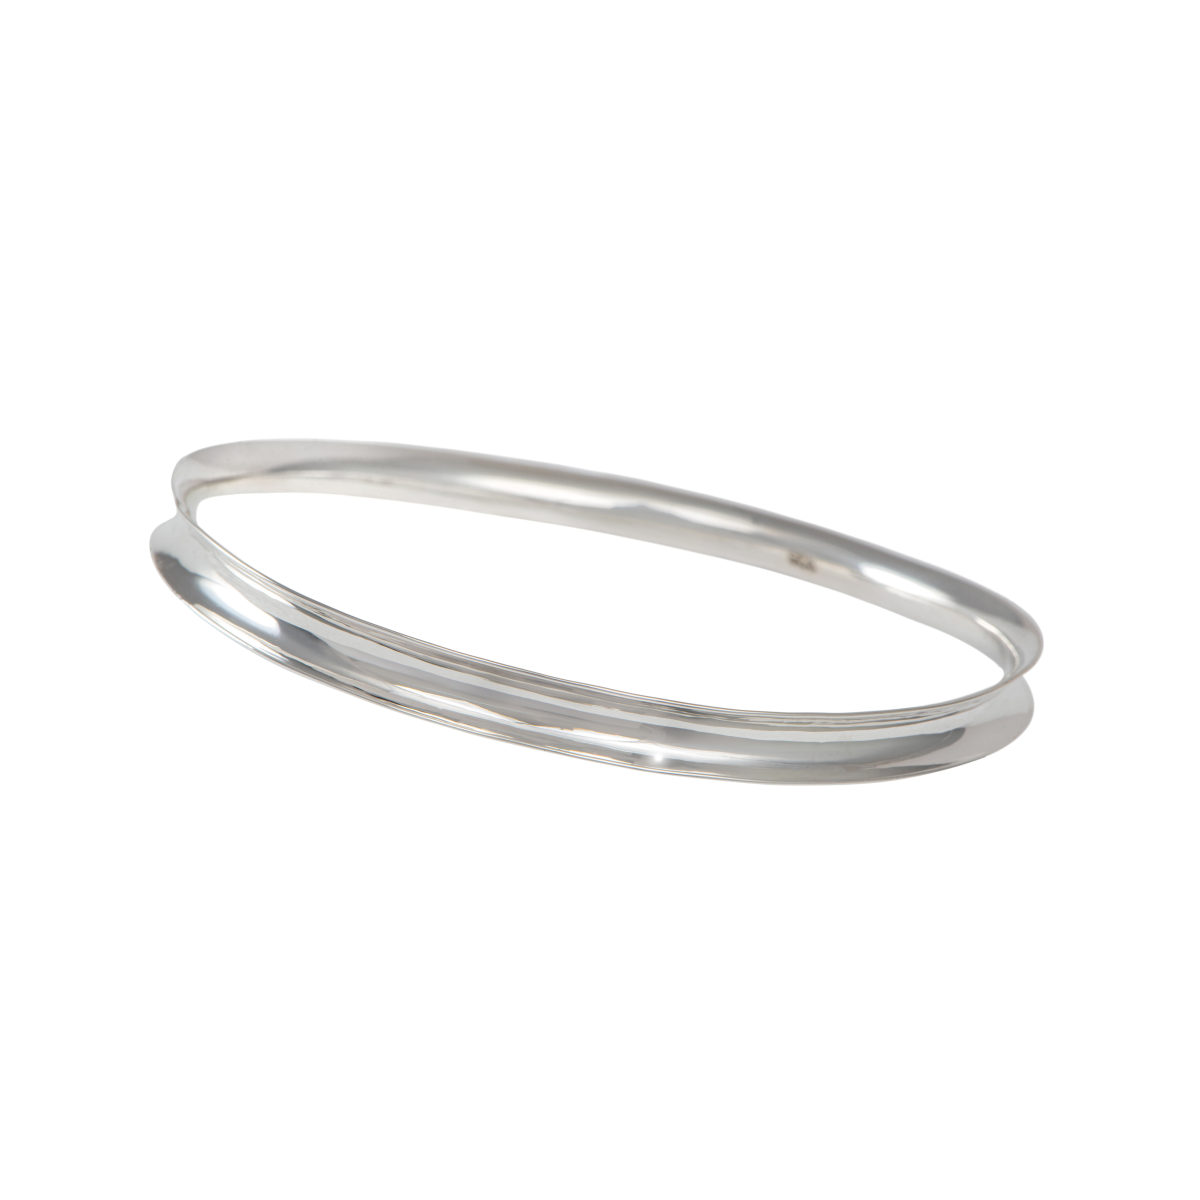 Round Sterling Silver 5mm wide Concave Bangle with a Polished Shiny Finish